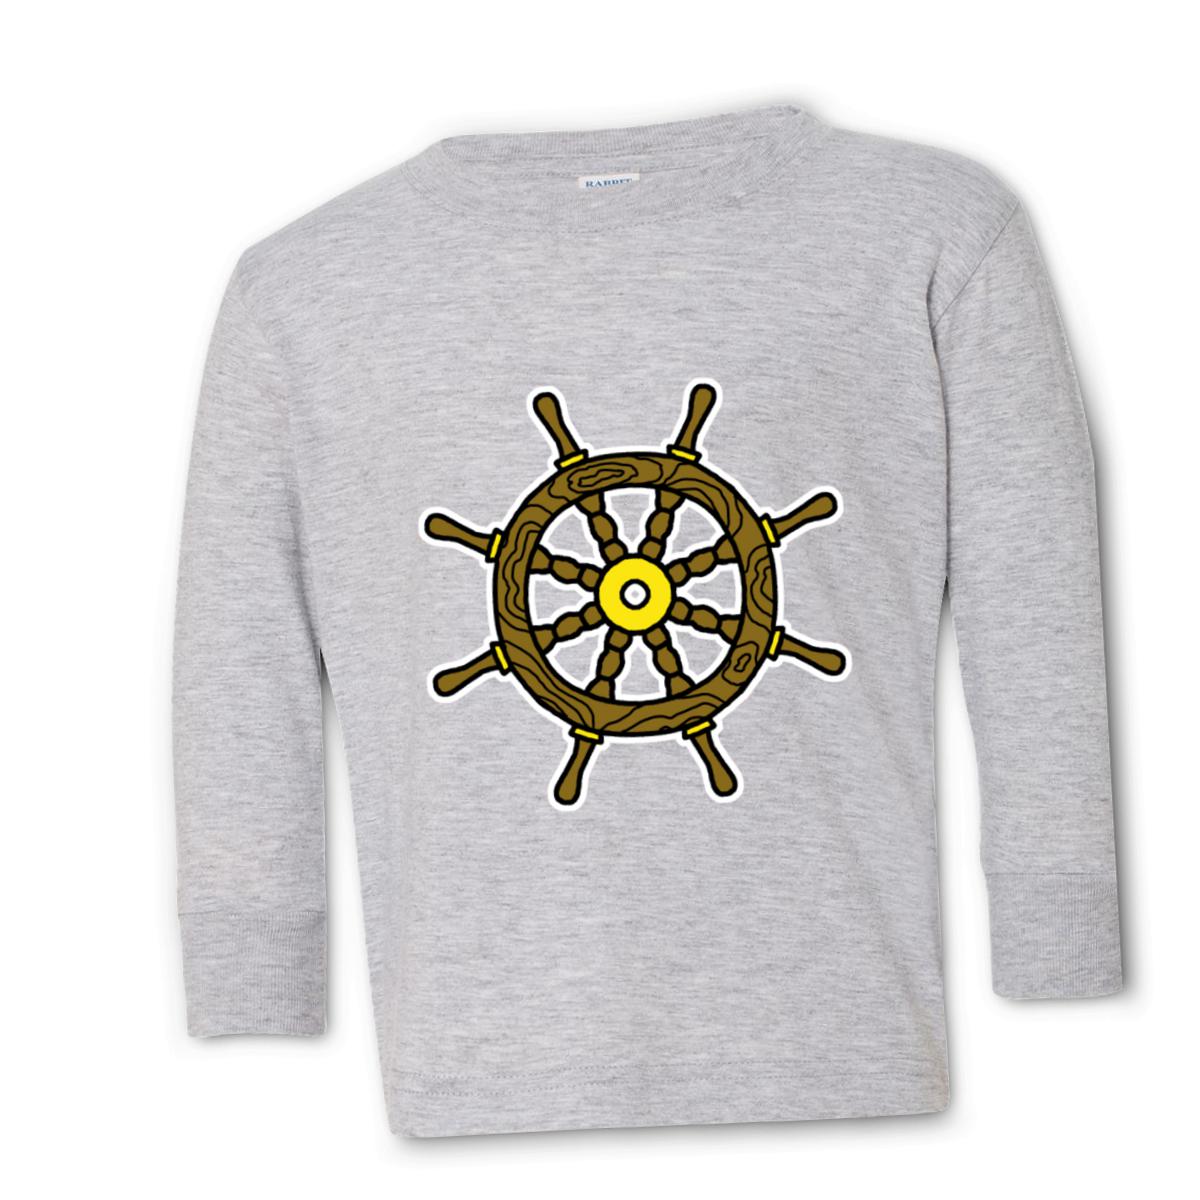 American Traditional Ship Wheel Toddler Long Sleeve Tee 2T heather